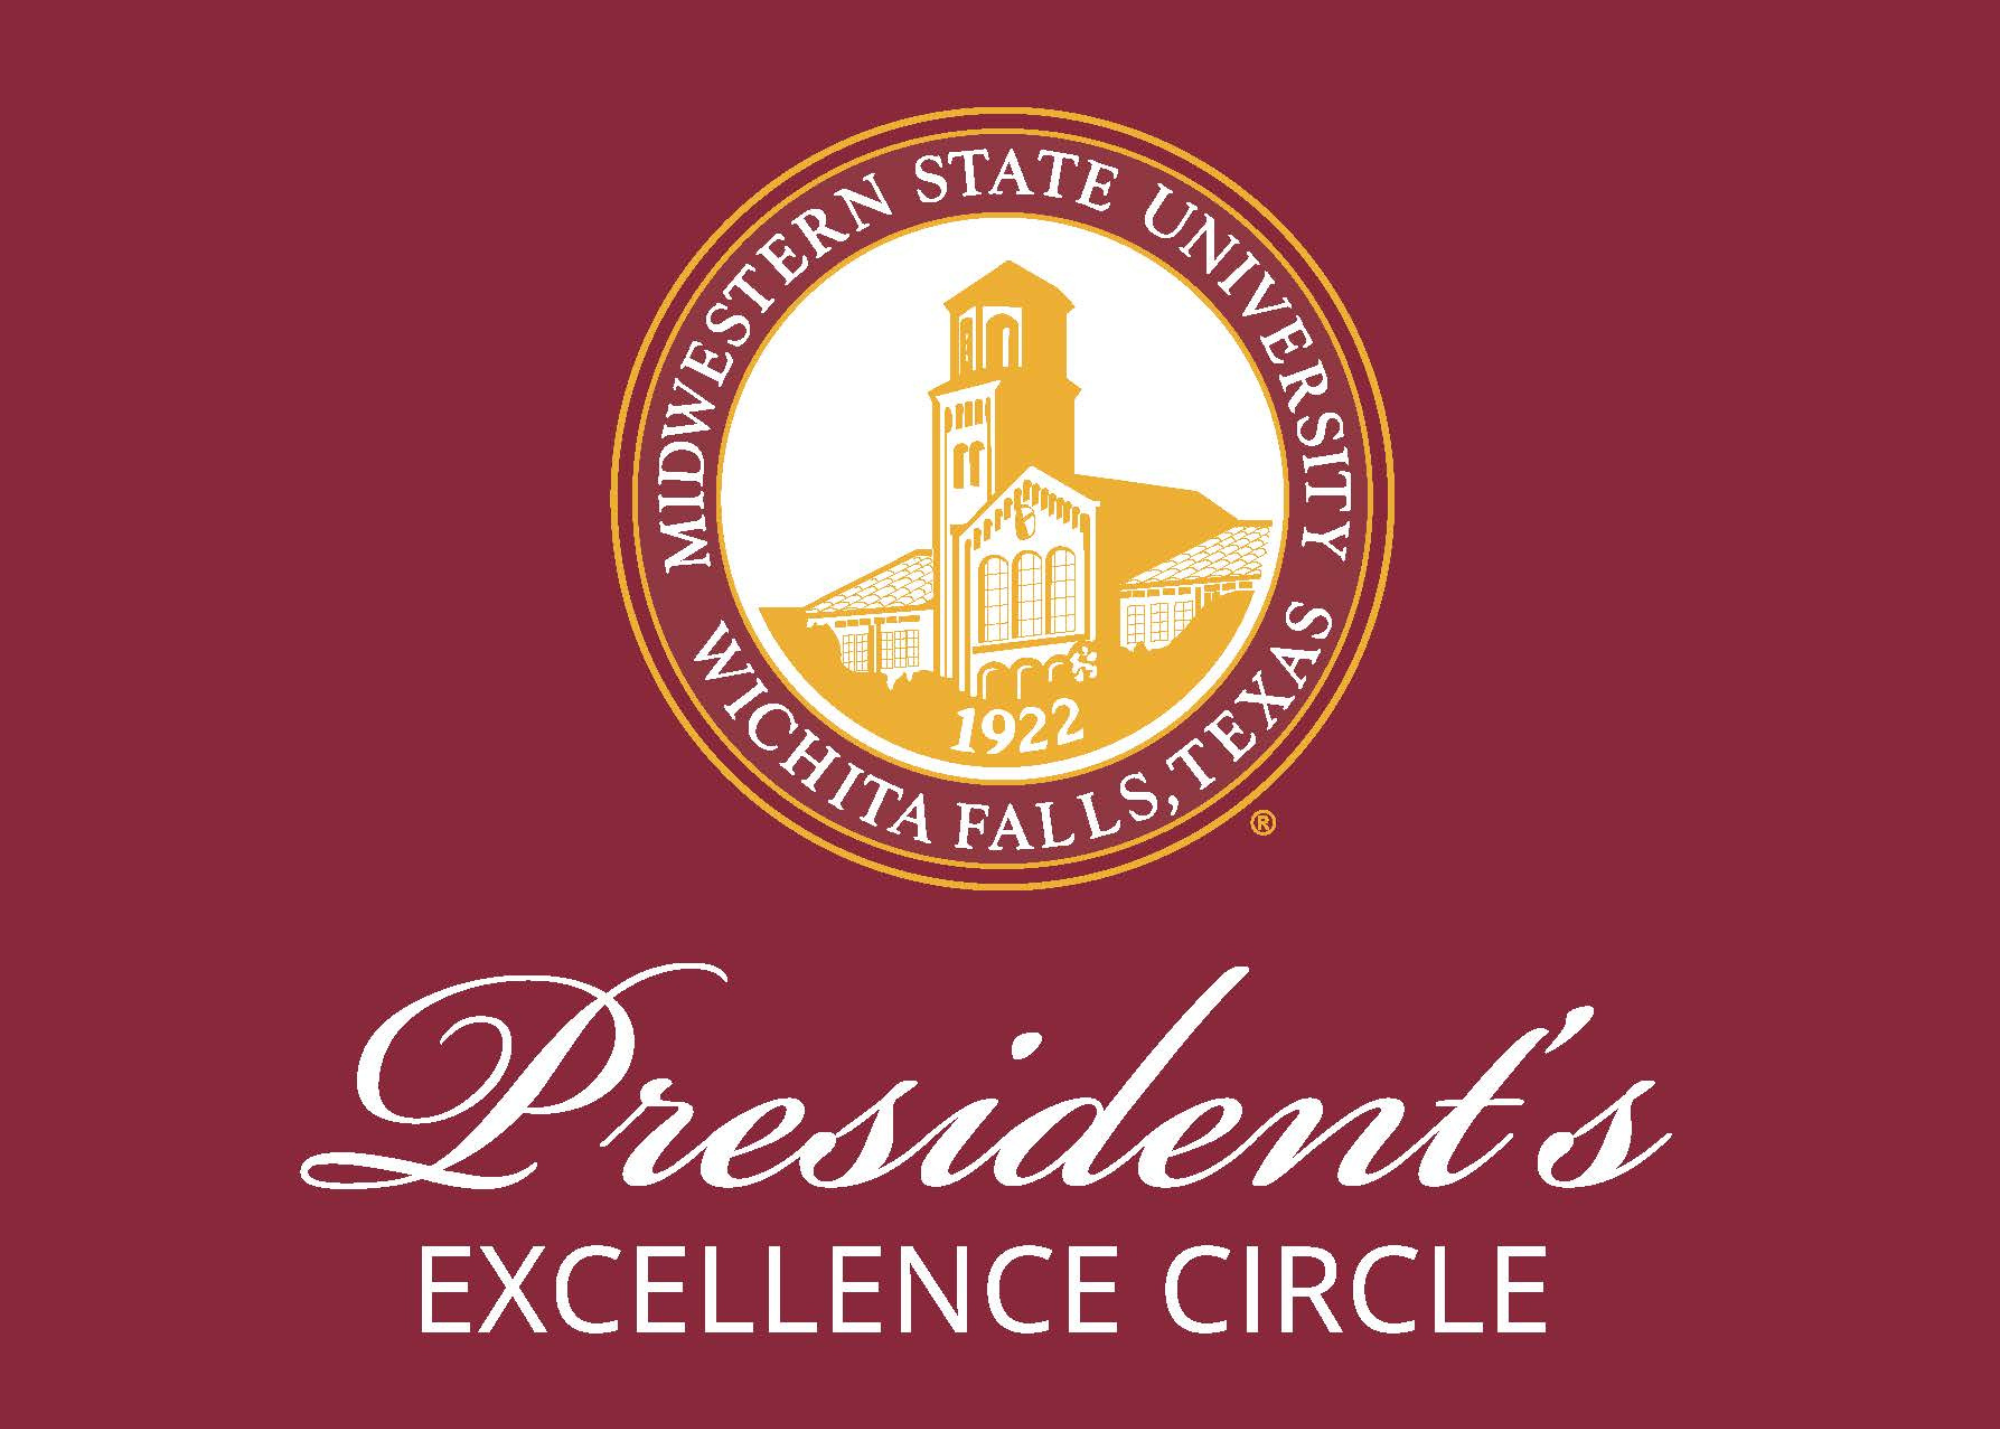 Join The President's Excellence Circle